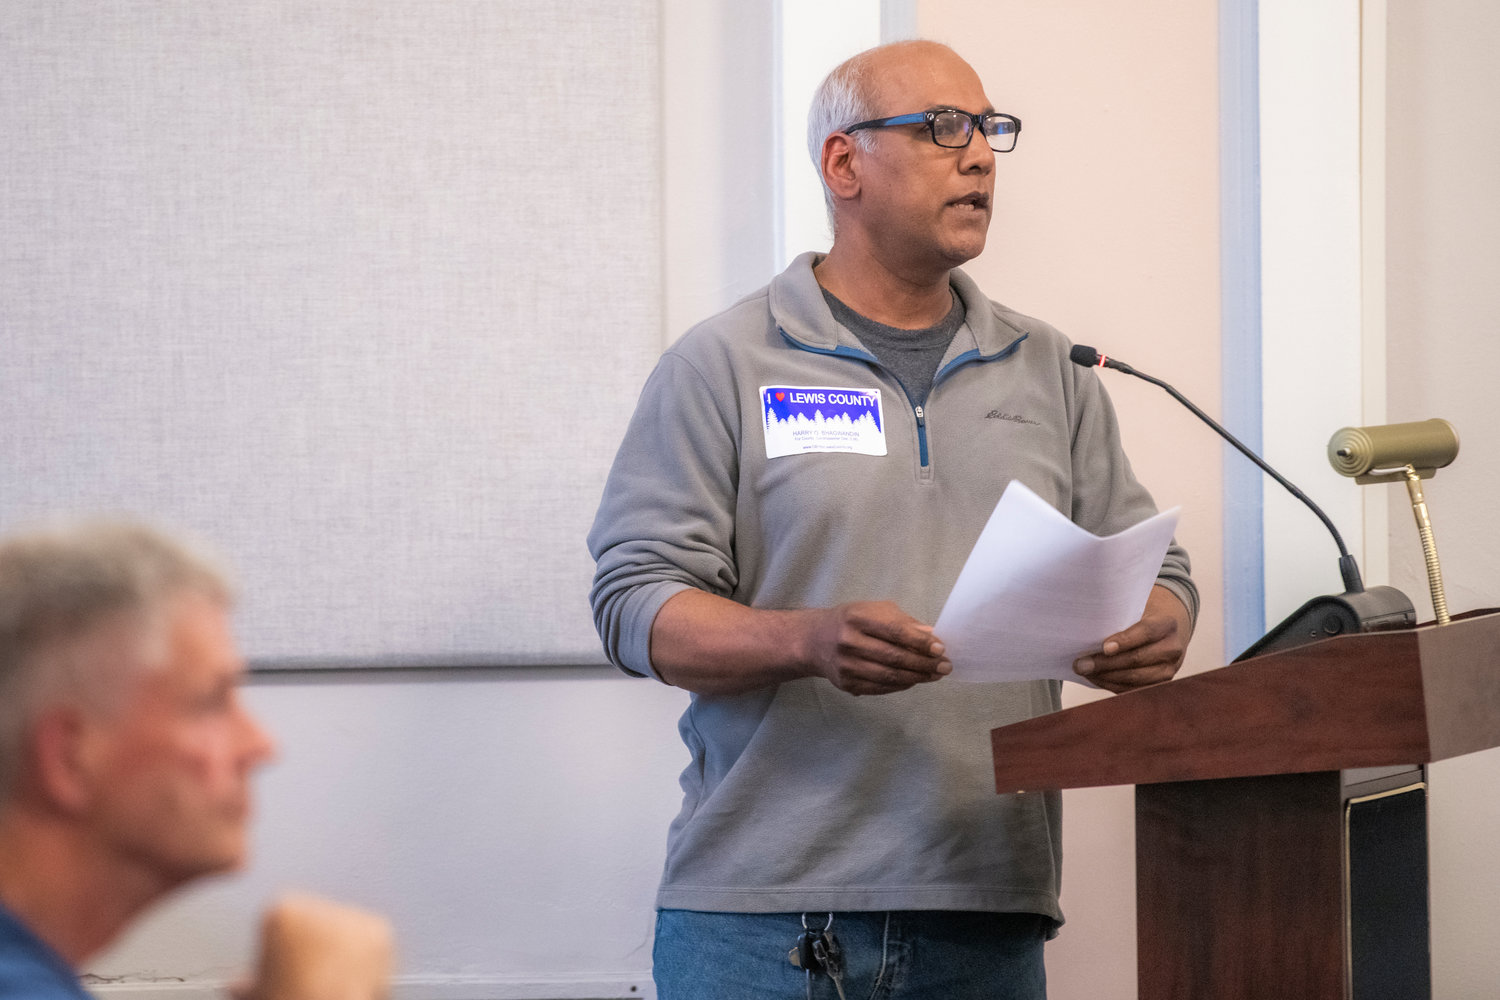 Harry Bhagwandin, a candidate for Lewis County Commission District 3, makes public comment to the Lewis County Planning Commission Tuesday evening during a workshop on a rezone proposal north of Mineral Lake.